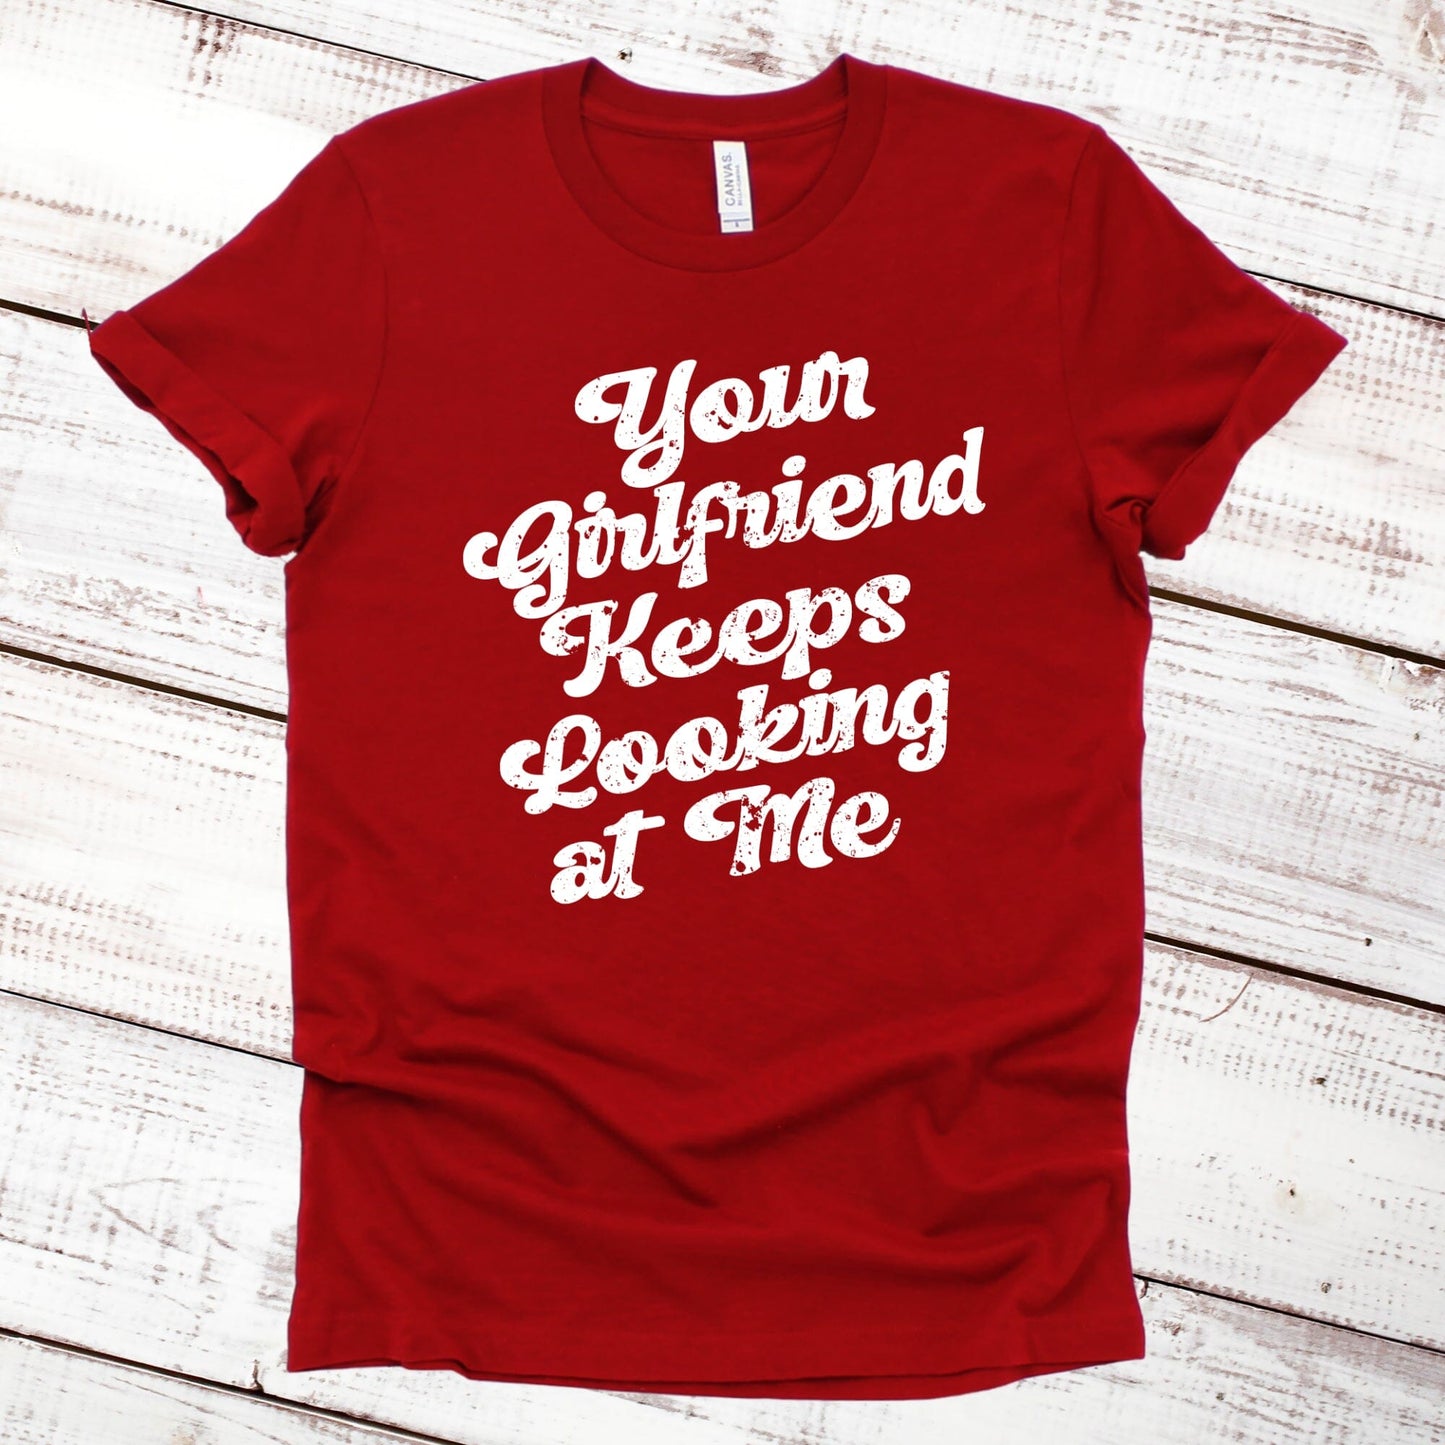 Your Girlfriend Keeps Looking at Me Funny Shirt Imprint Maker Red XS 